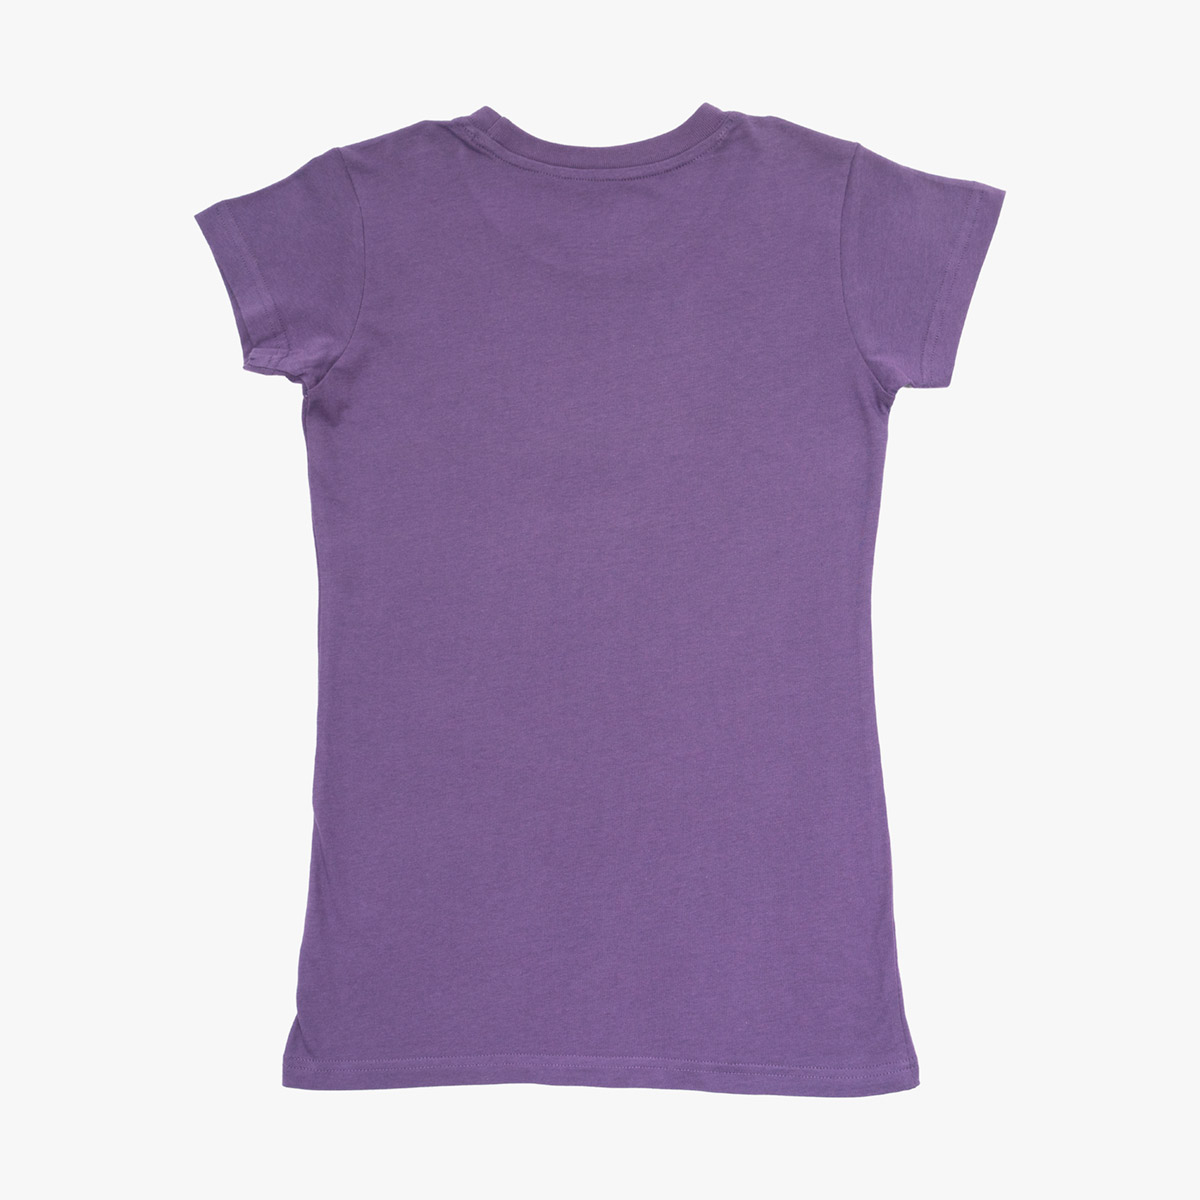 Youth Fit Pop of Color Tee In Grape Compote image number 3